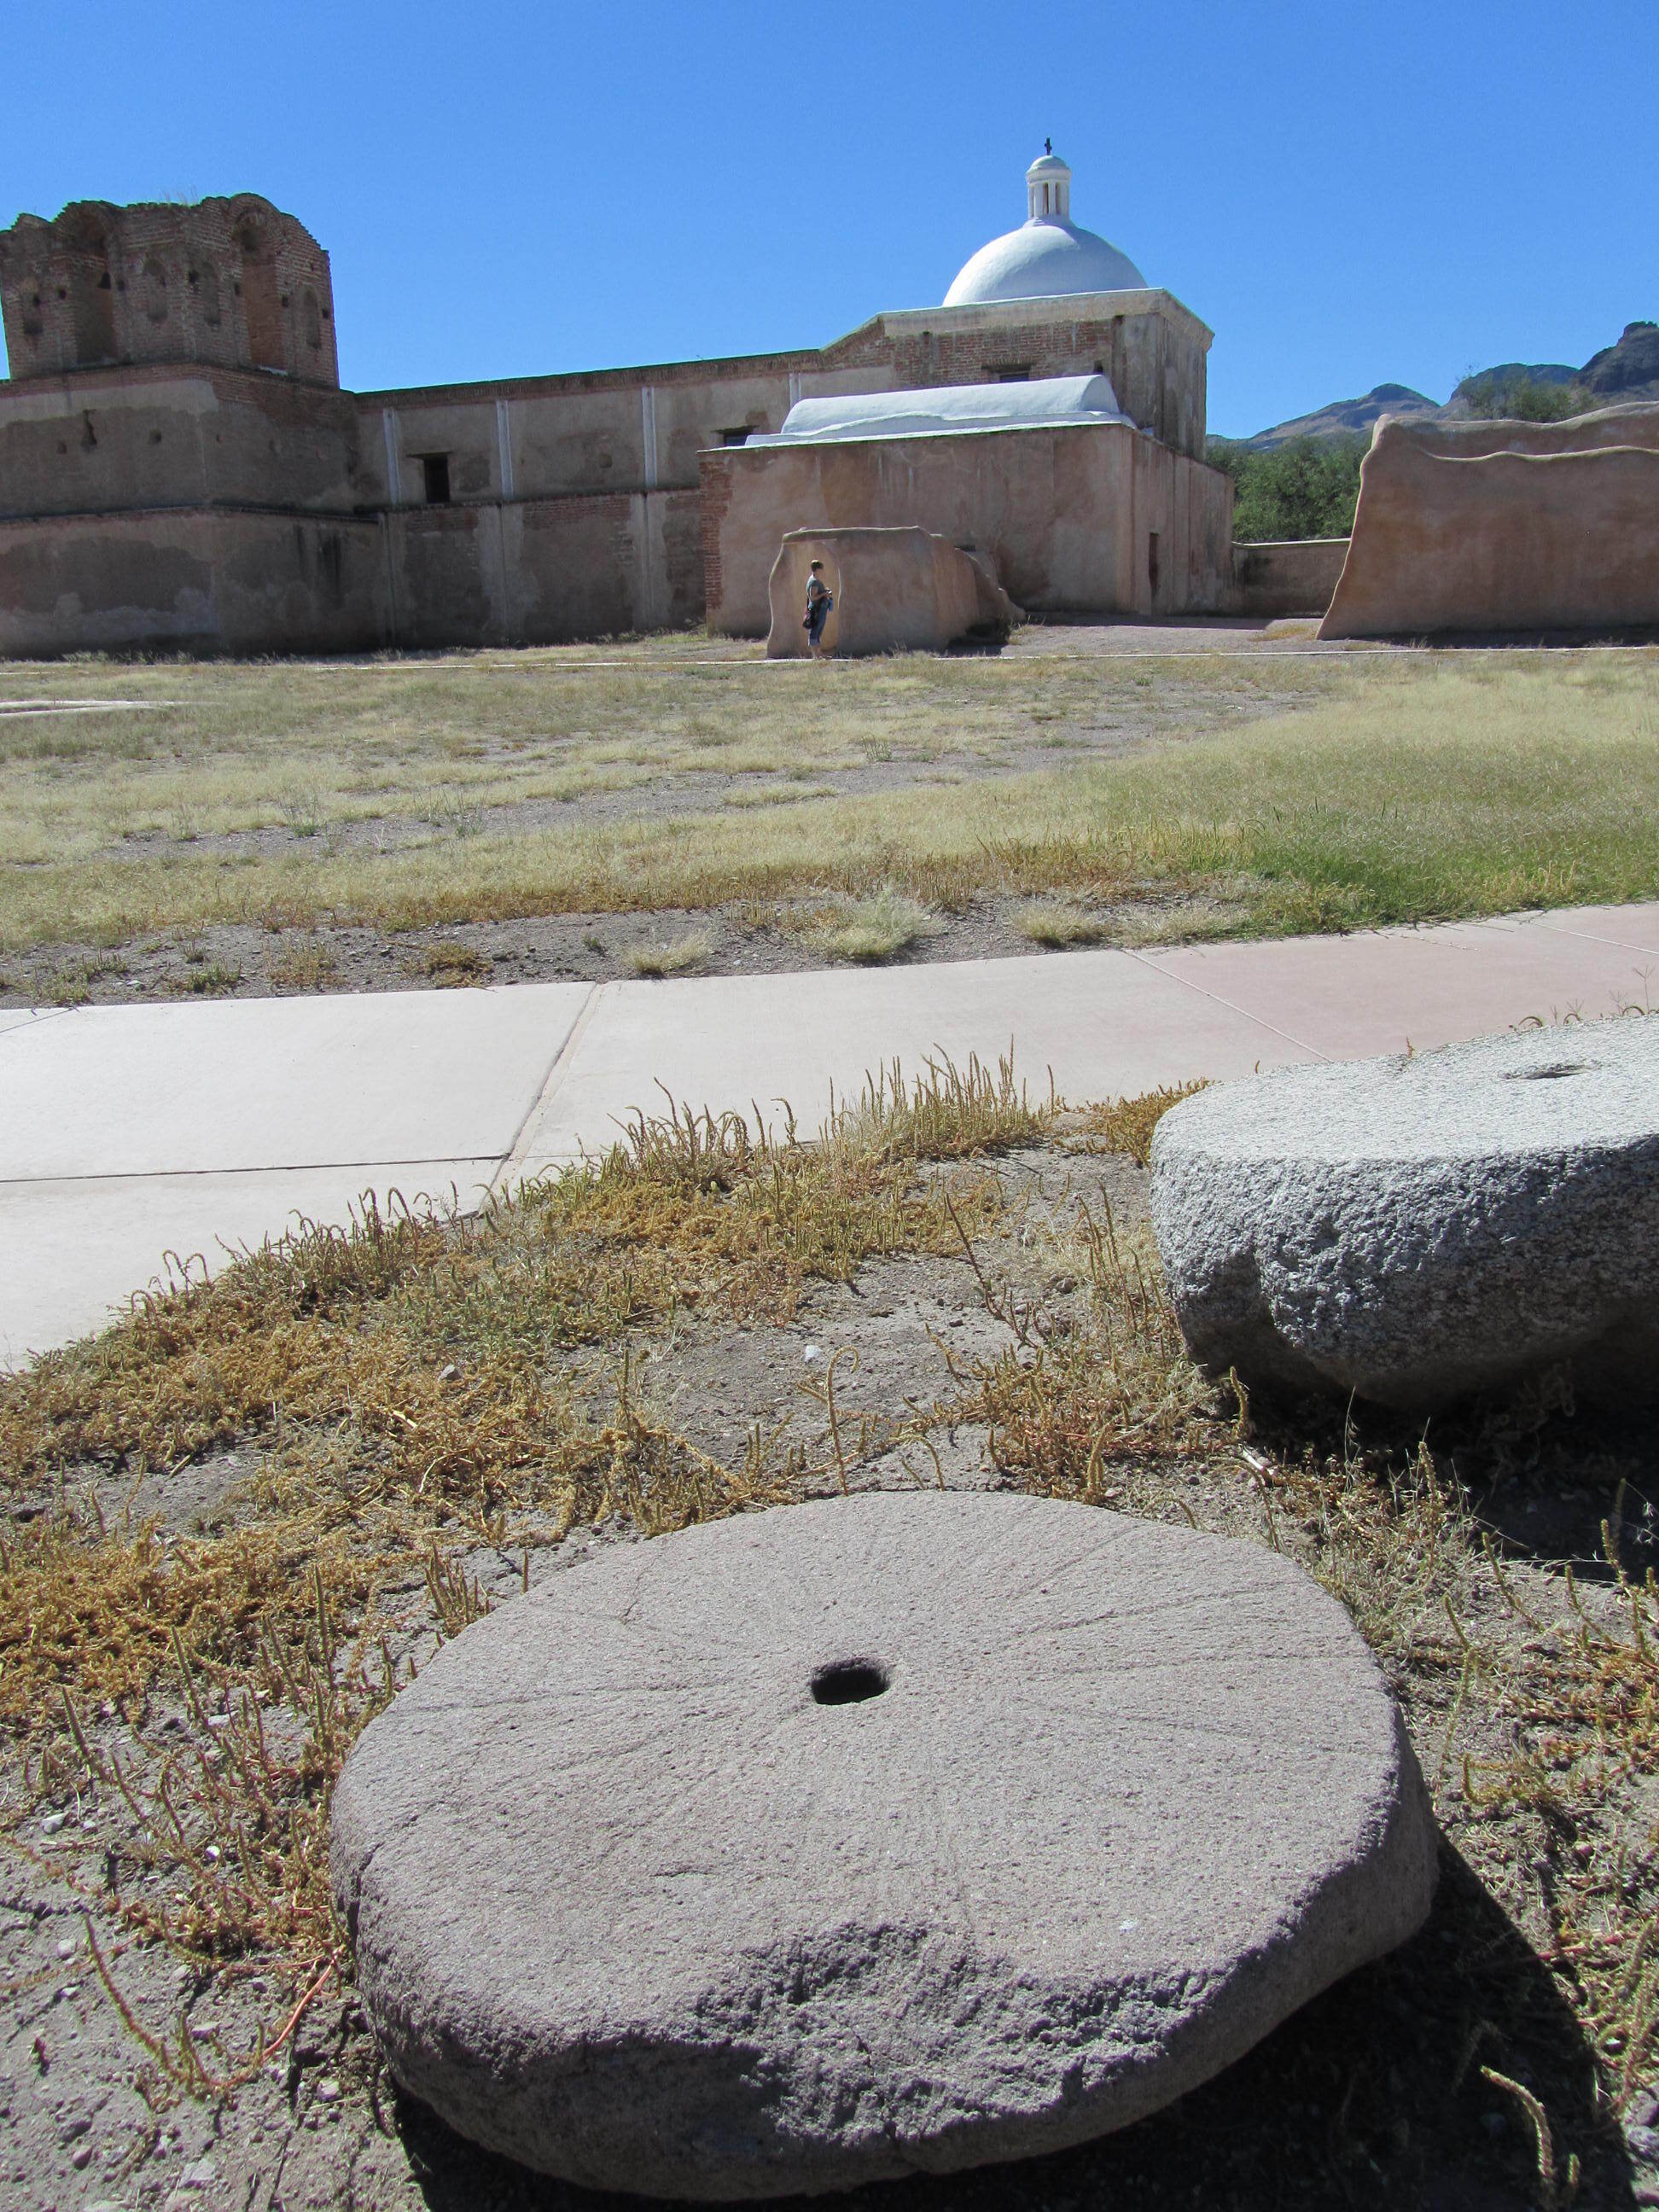 Tumacácori mission church exterior with grinding stone in the foreground